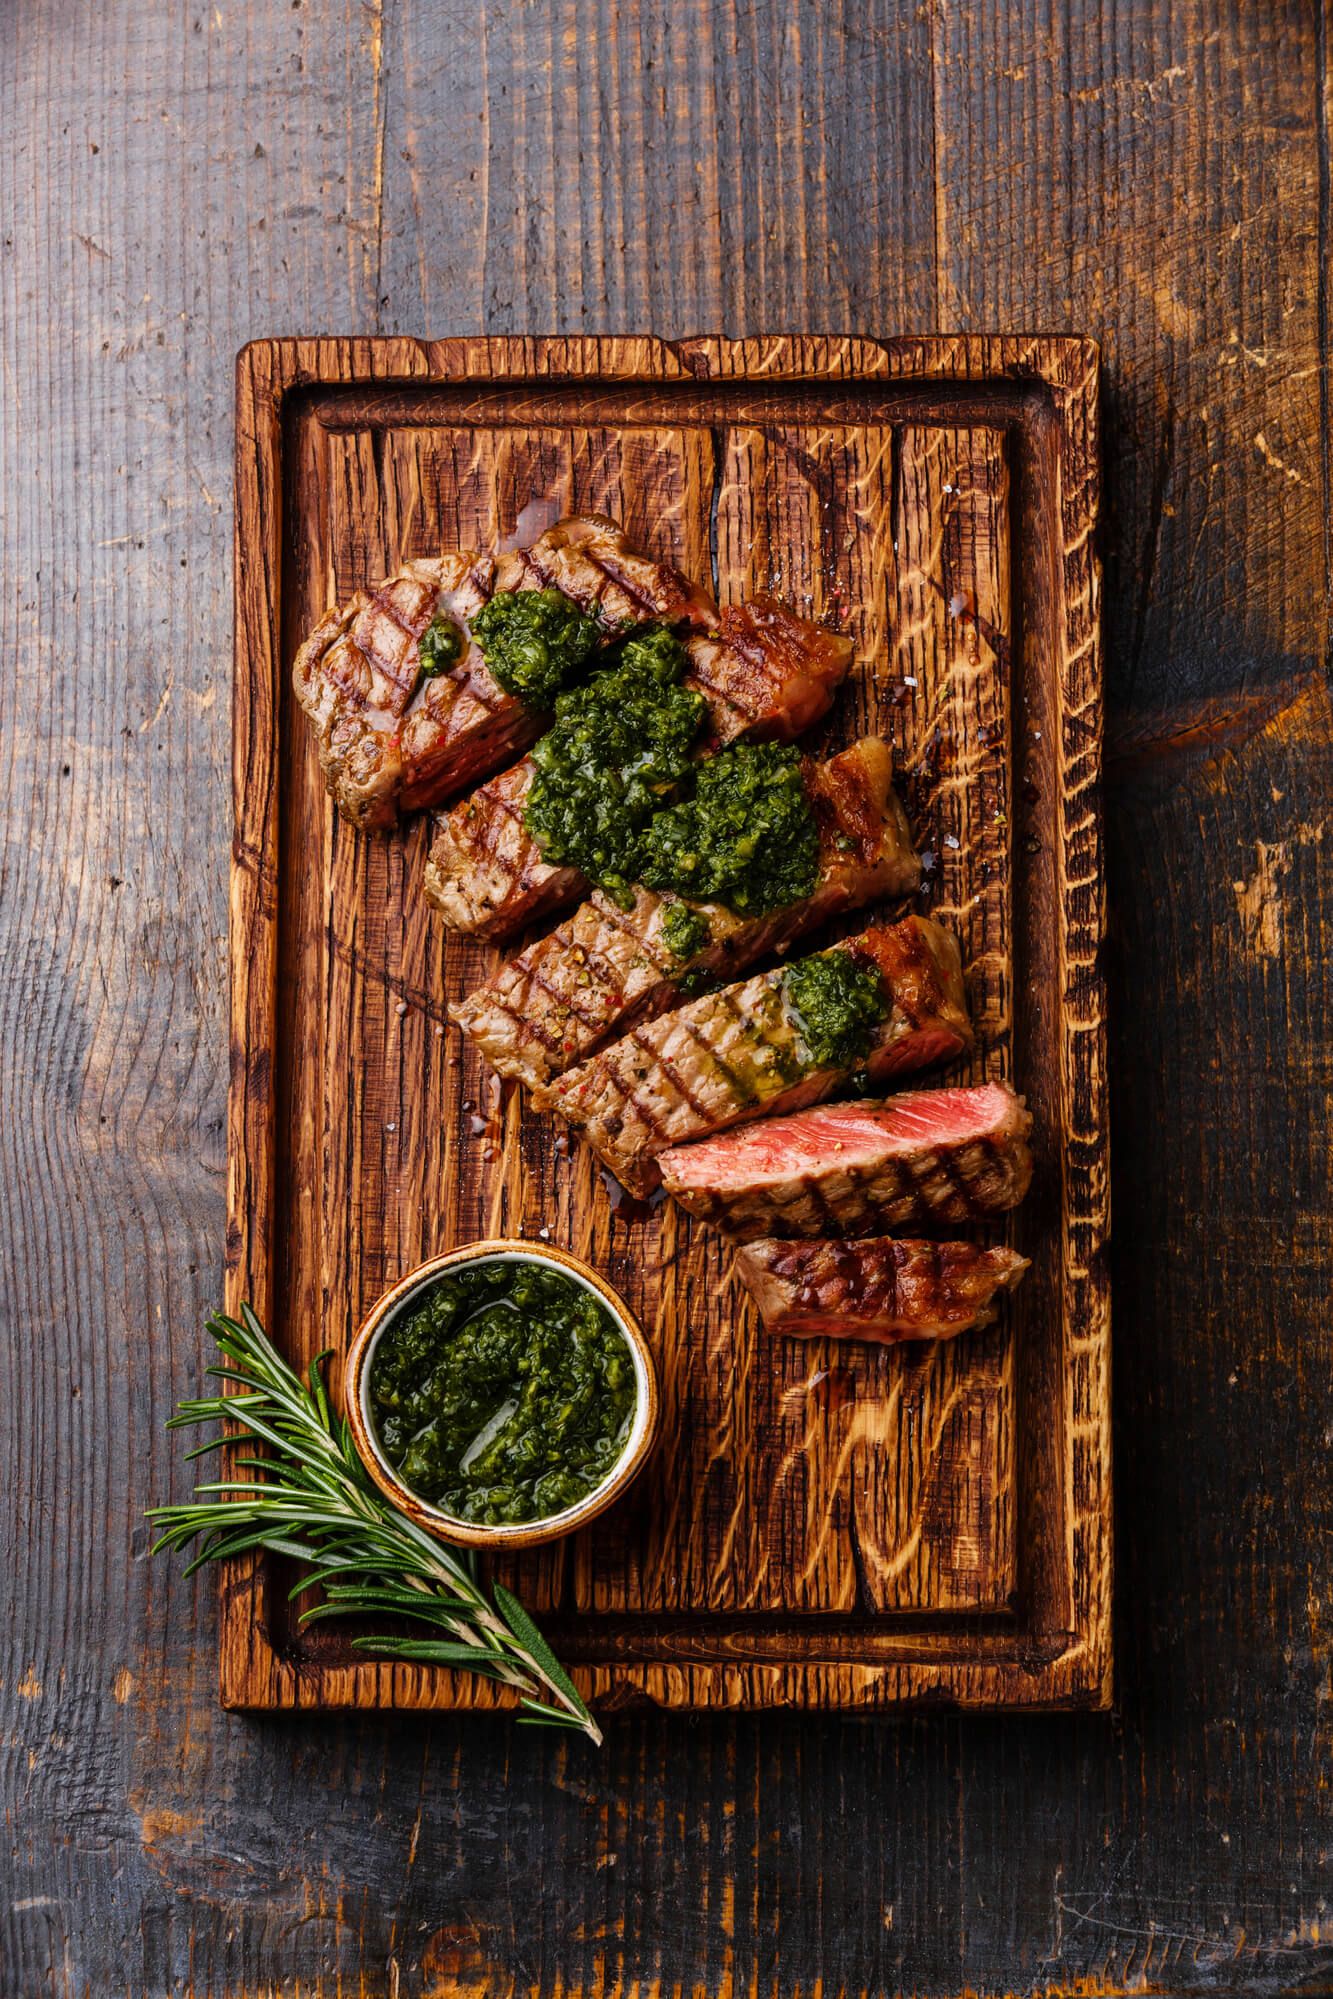 Grilled sirloin with chimichurri on a wooden cutting board.